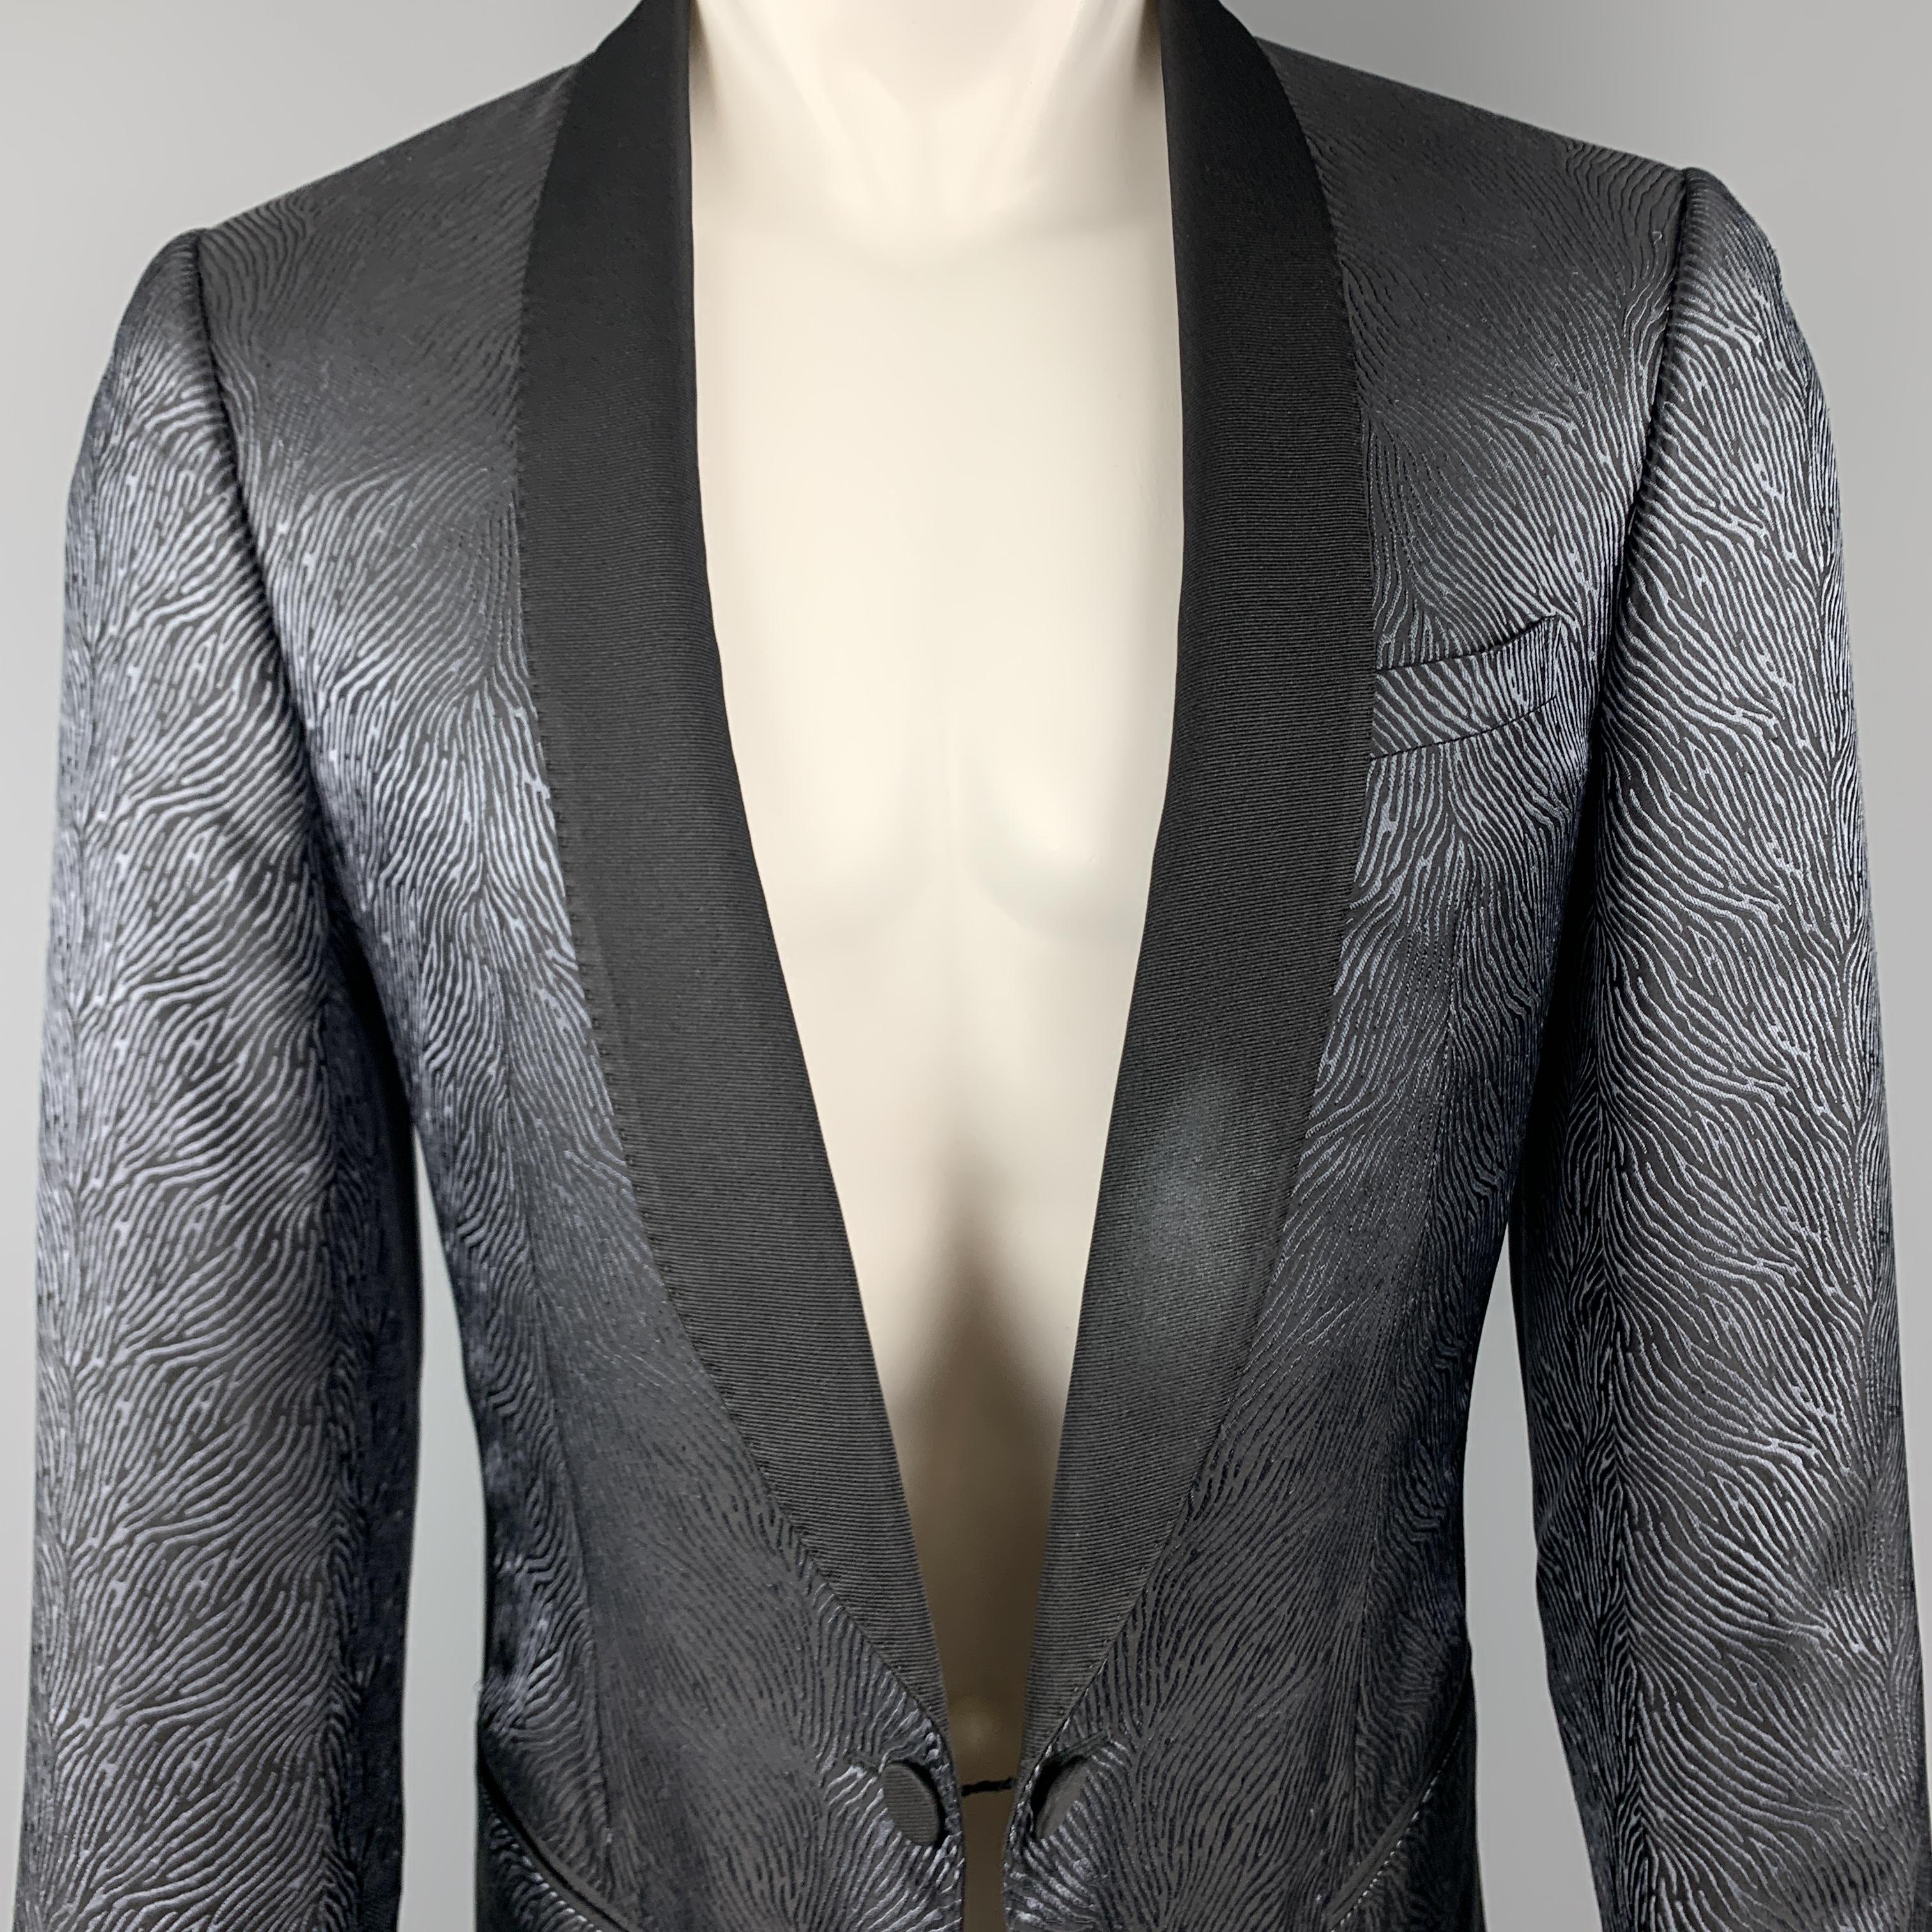 LANVIN dinner jacket comes in blue and black animal print satin with a faille shawl collar and link closure. Imperfection on lapel. As-is.  Made in Italy.

Good Pre-Owned Condition.
Marked: IT 50

Measurements:

Shoulder:16 in.
Chest: 40 in.
Sleeve: